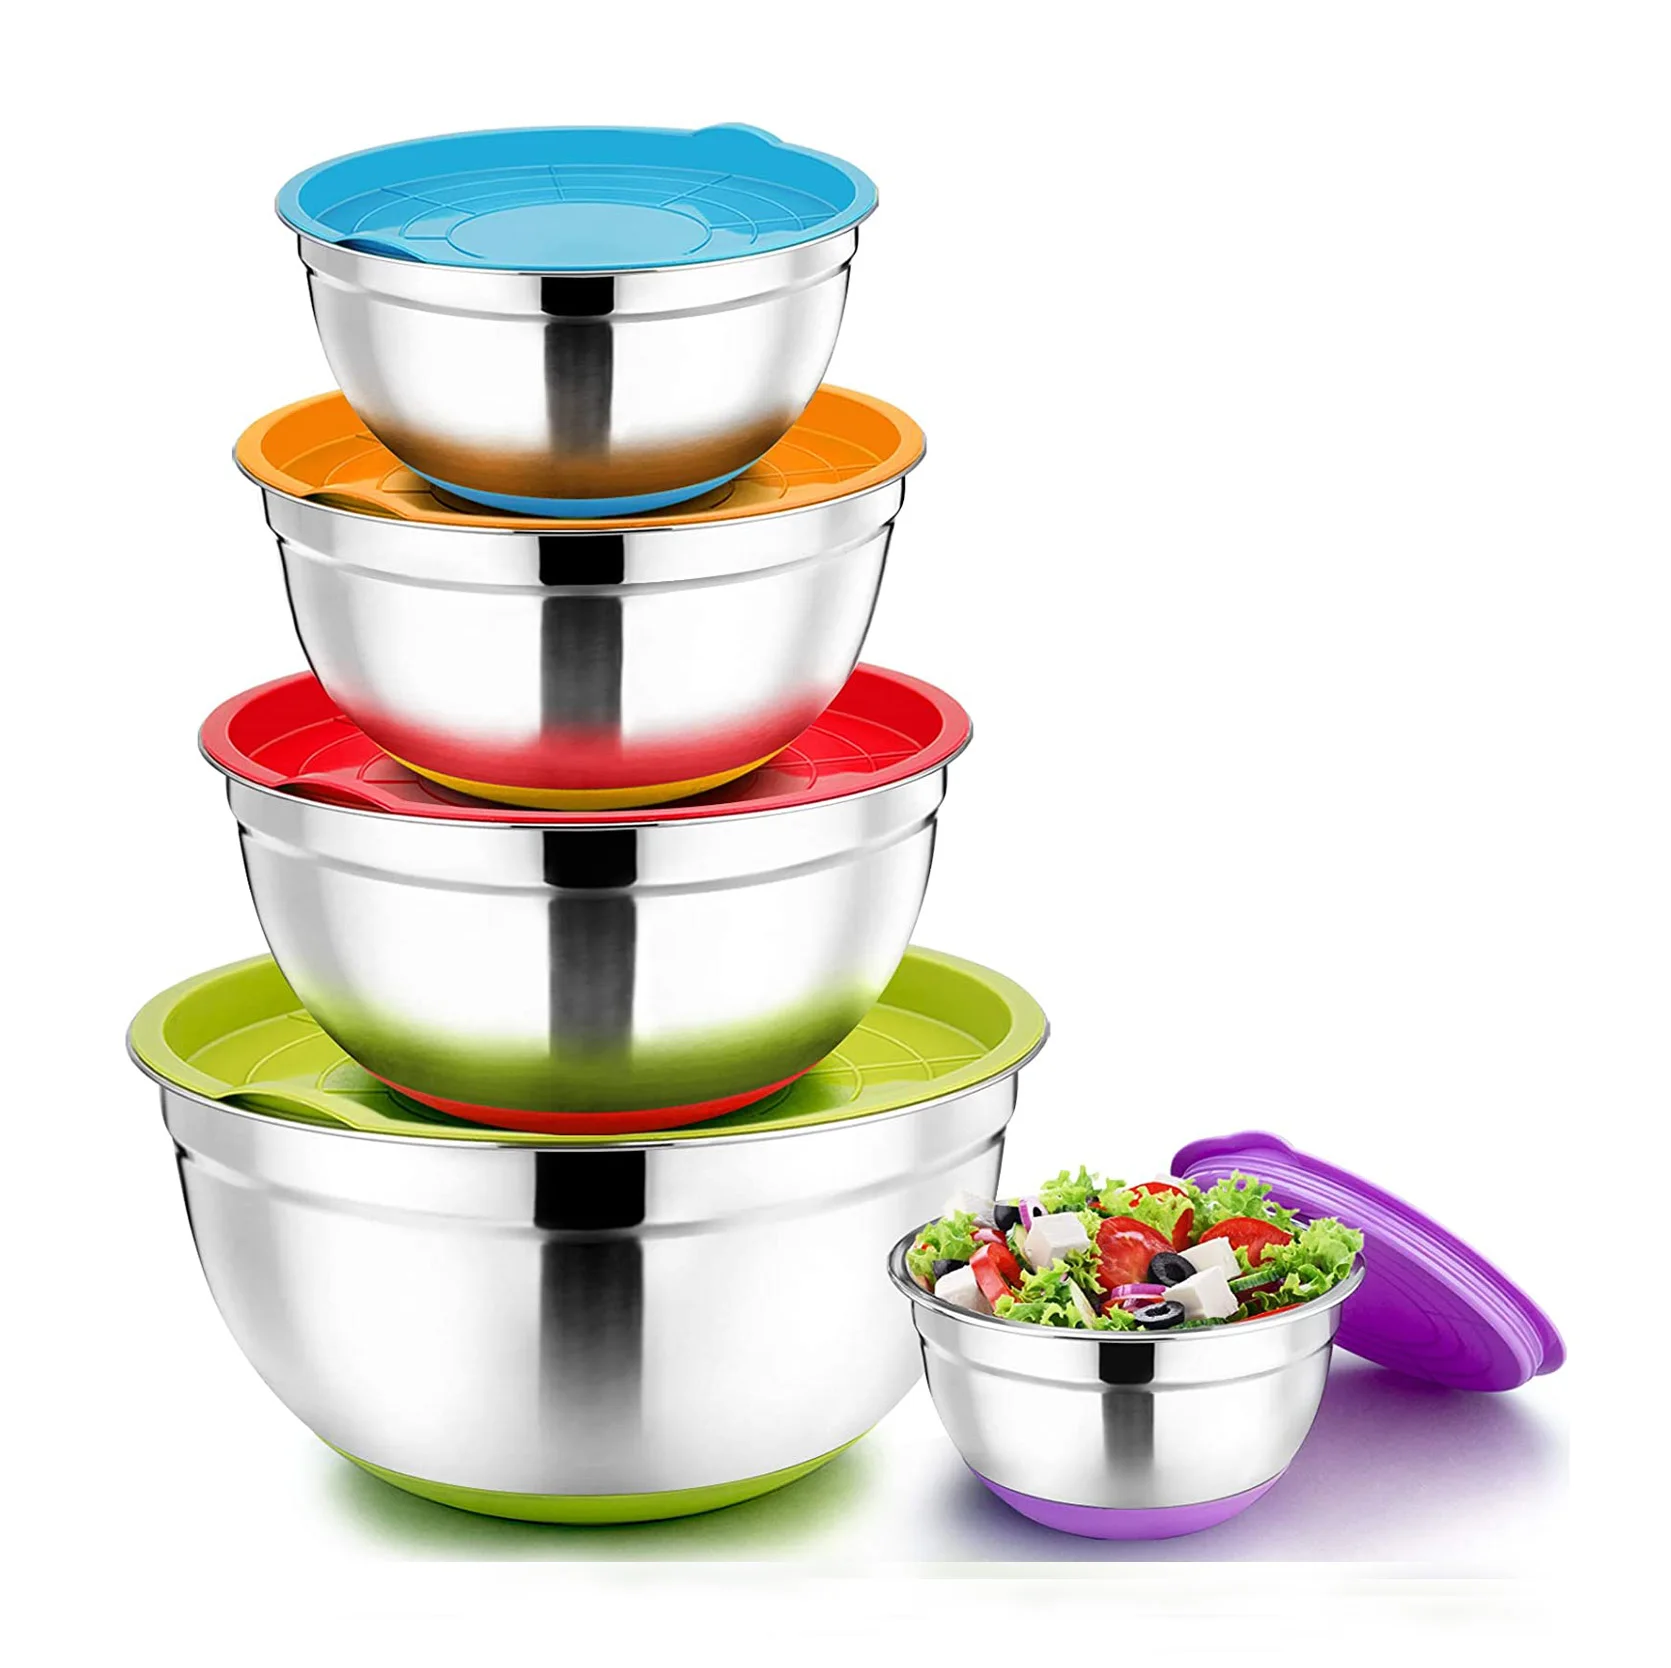 

Cooking Tool Baking Accessory Serving Stainless Steel Salad Bowls Metal Nesting Bowls with Airtight Lids Mixing Bowls with Lids, Customized color